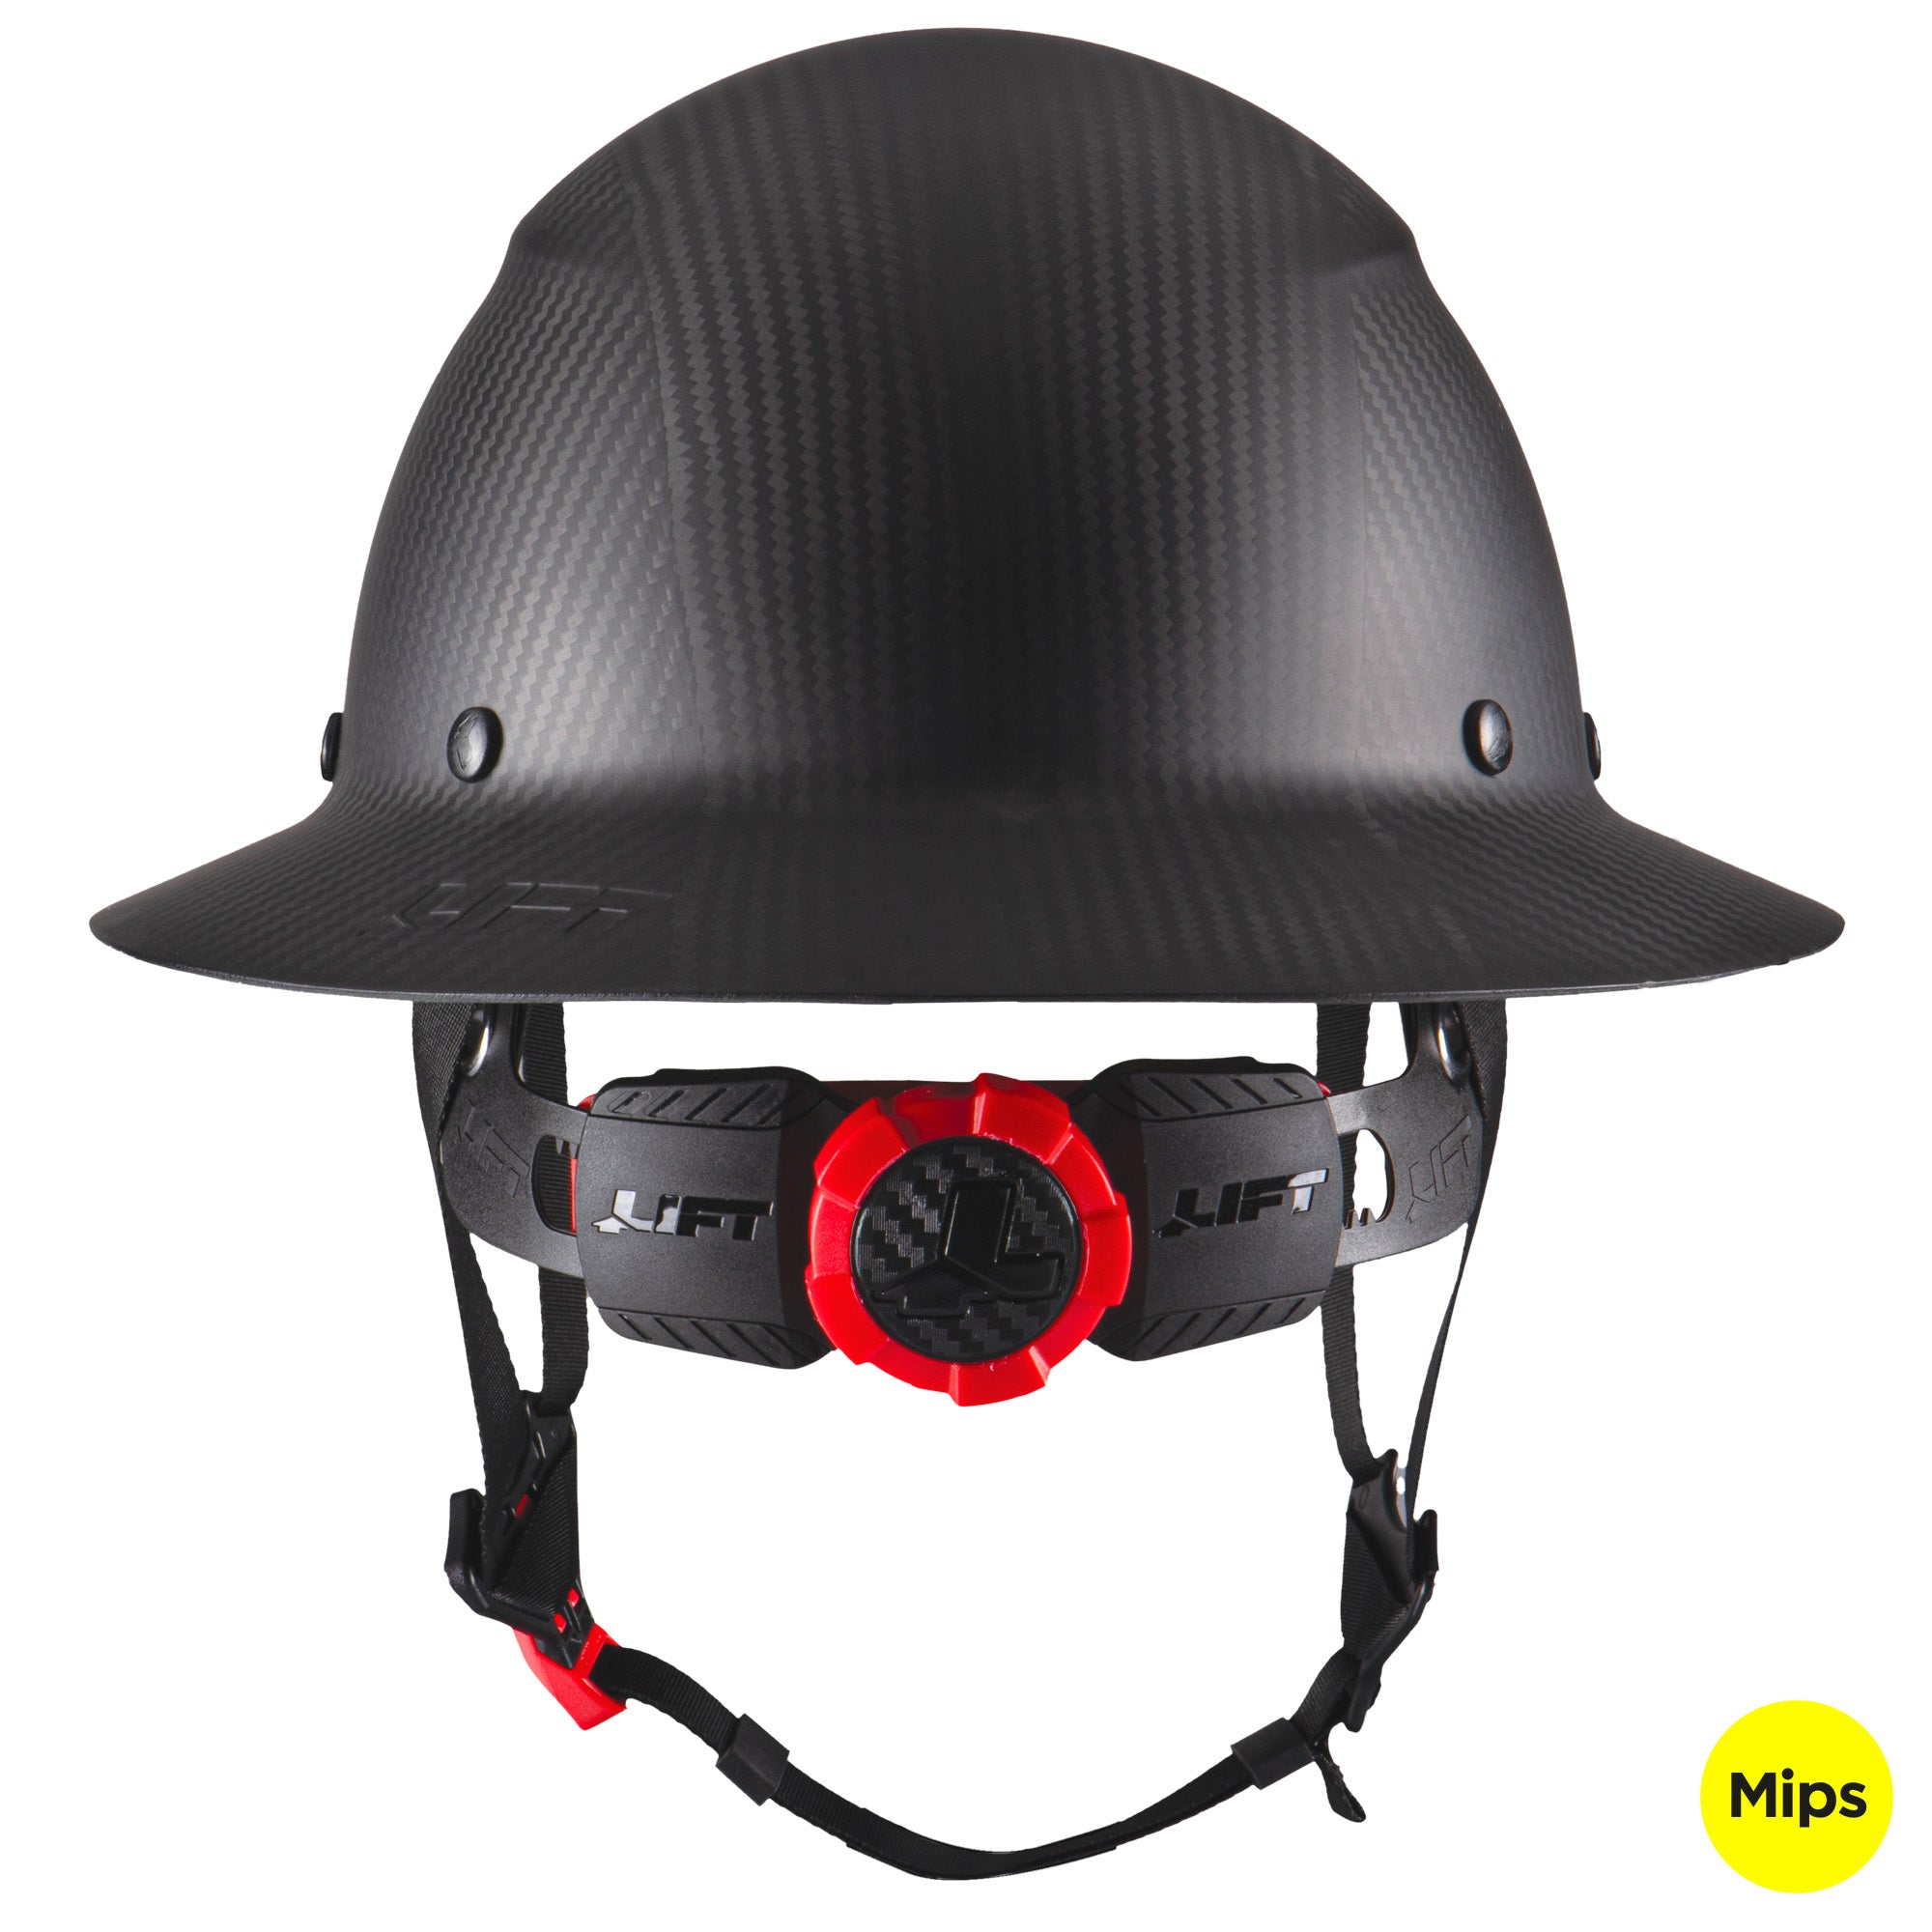 DAX Full Brim Hard Hat with Mips - Carbon Matte